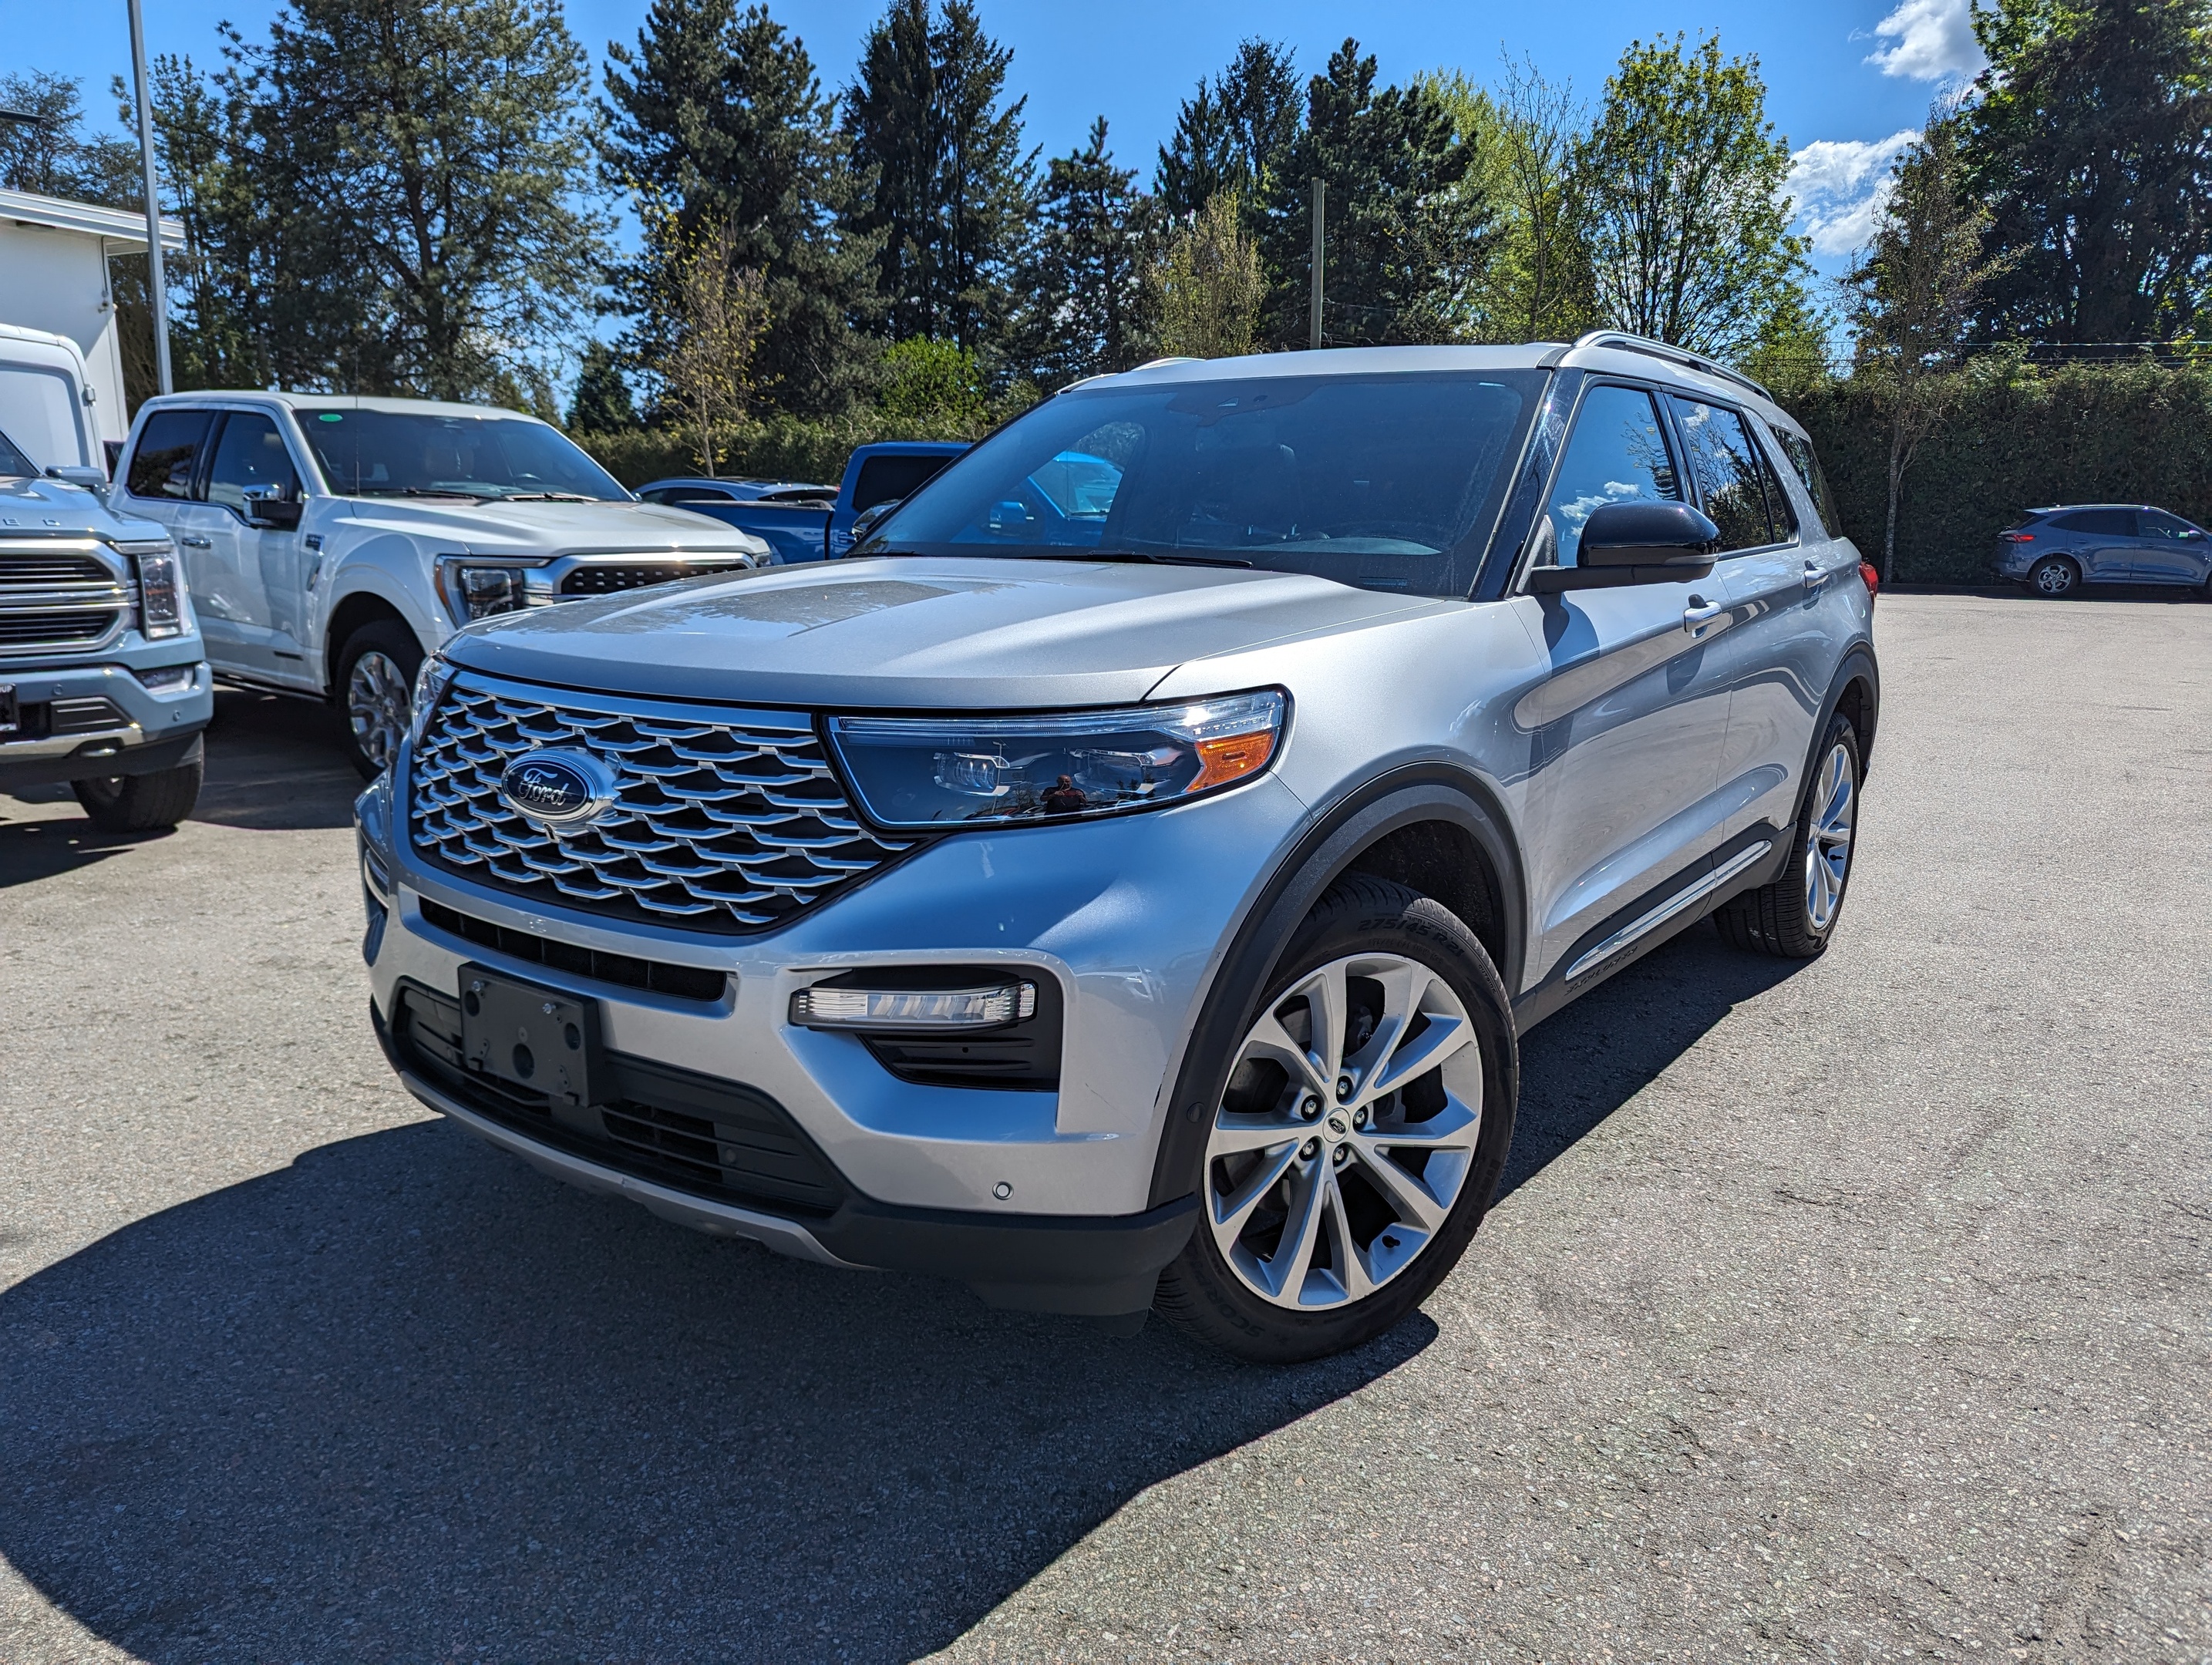 2021 Ford Explorer Platinum 4WD - Hand's Free Liftgate, FordPass